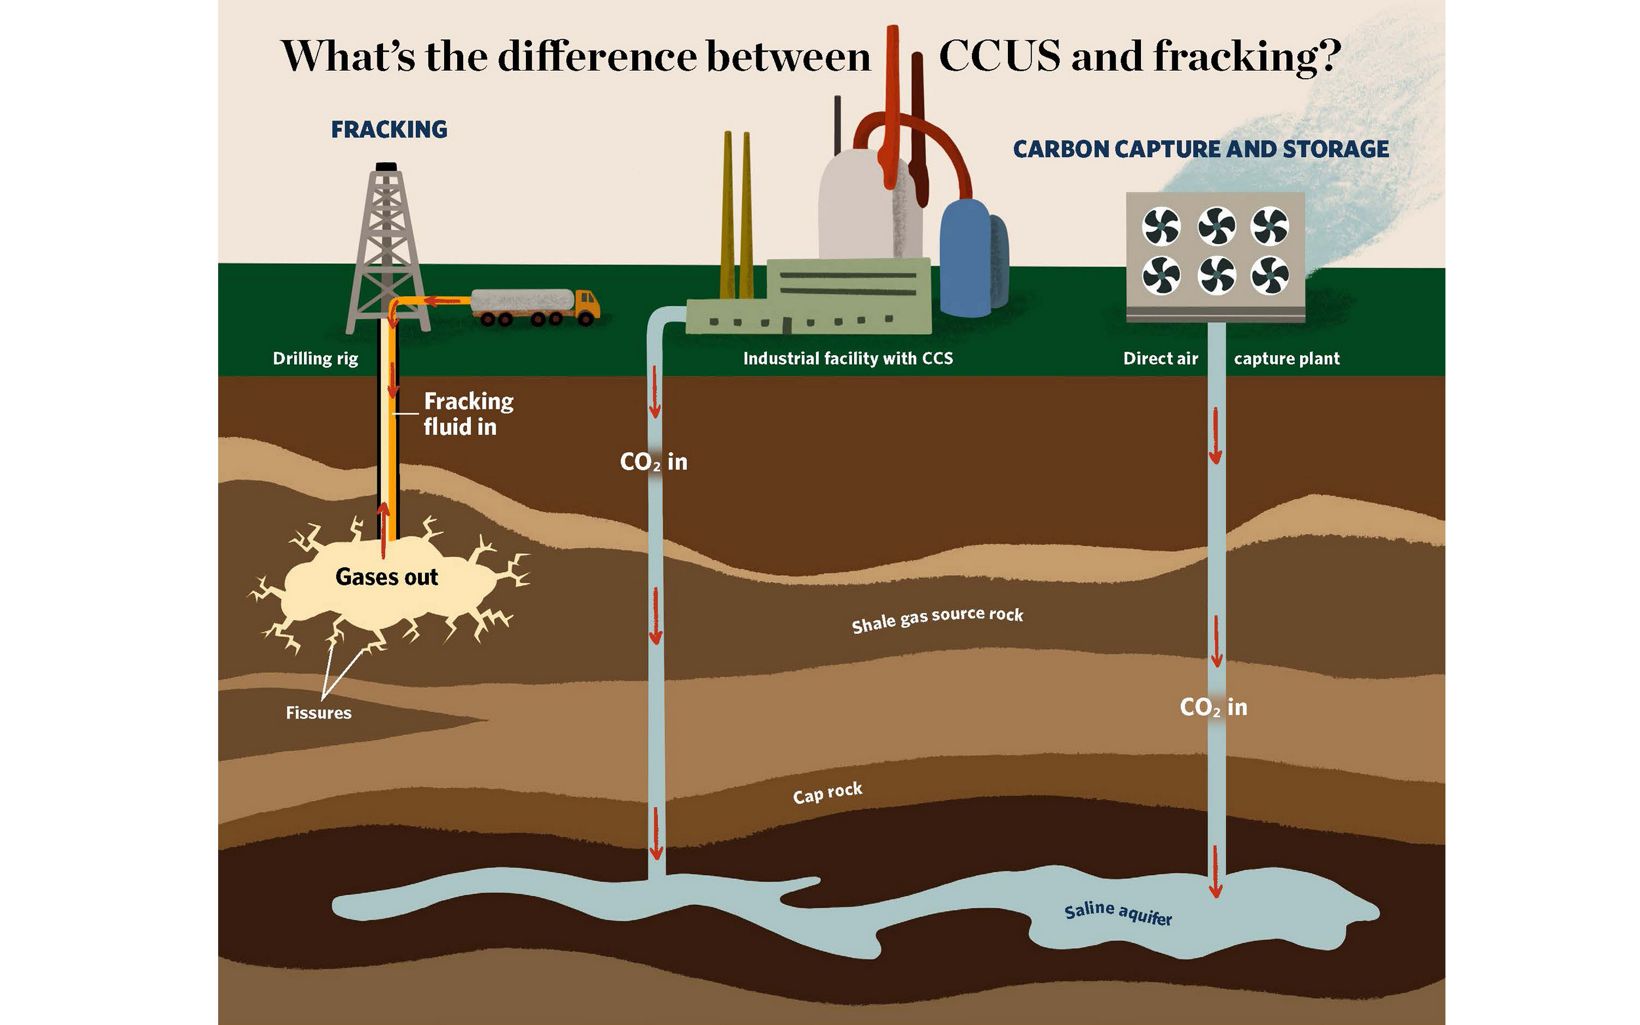 
                
                  CCUS vs Fracking Fracking extracts oil or gas by injecting "fracking fluid" into a well to create cracks in deep-rock formations. CCUS pumps liquified CO2 into deep, porous saline formations.
                  
                
              